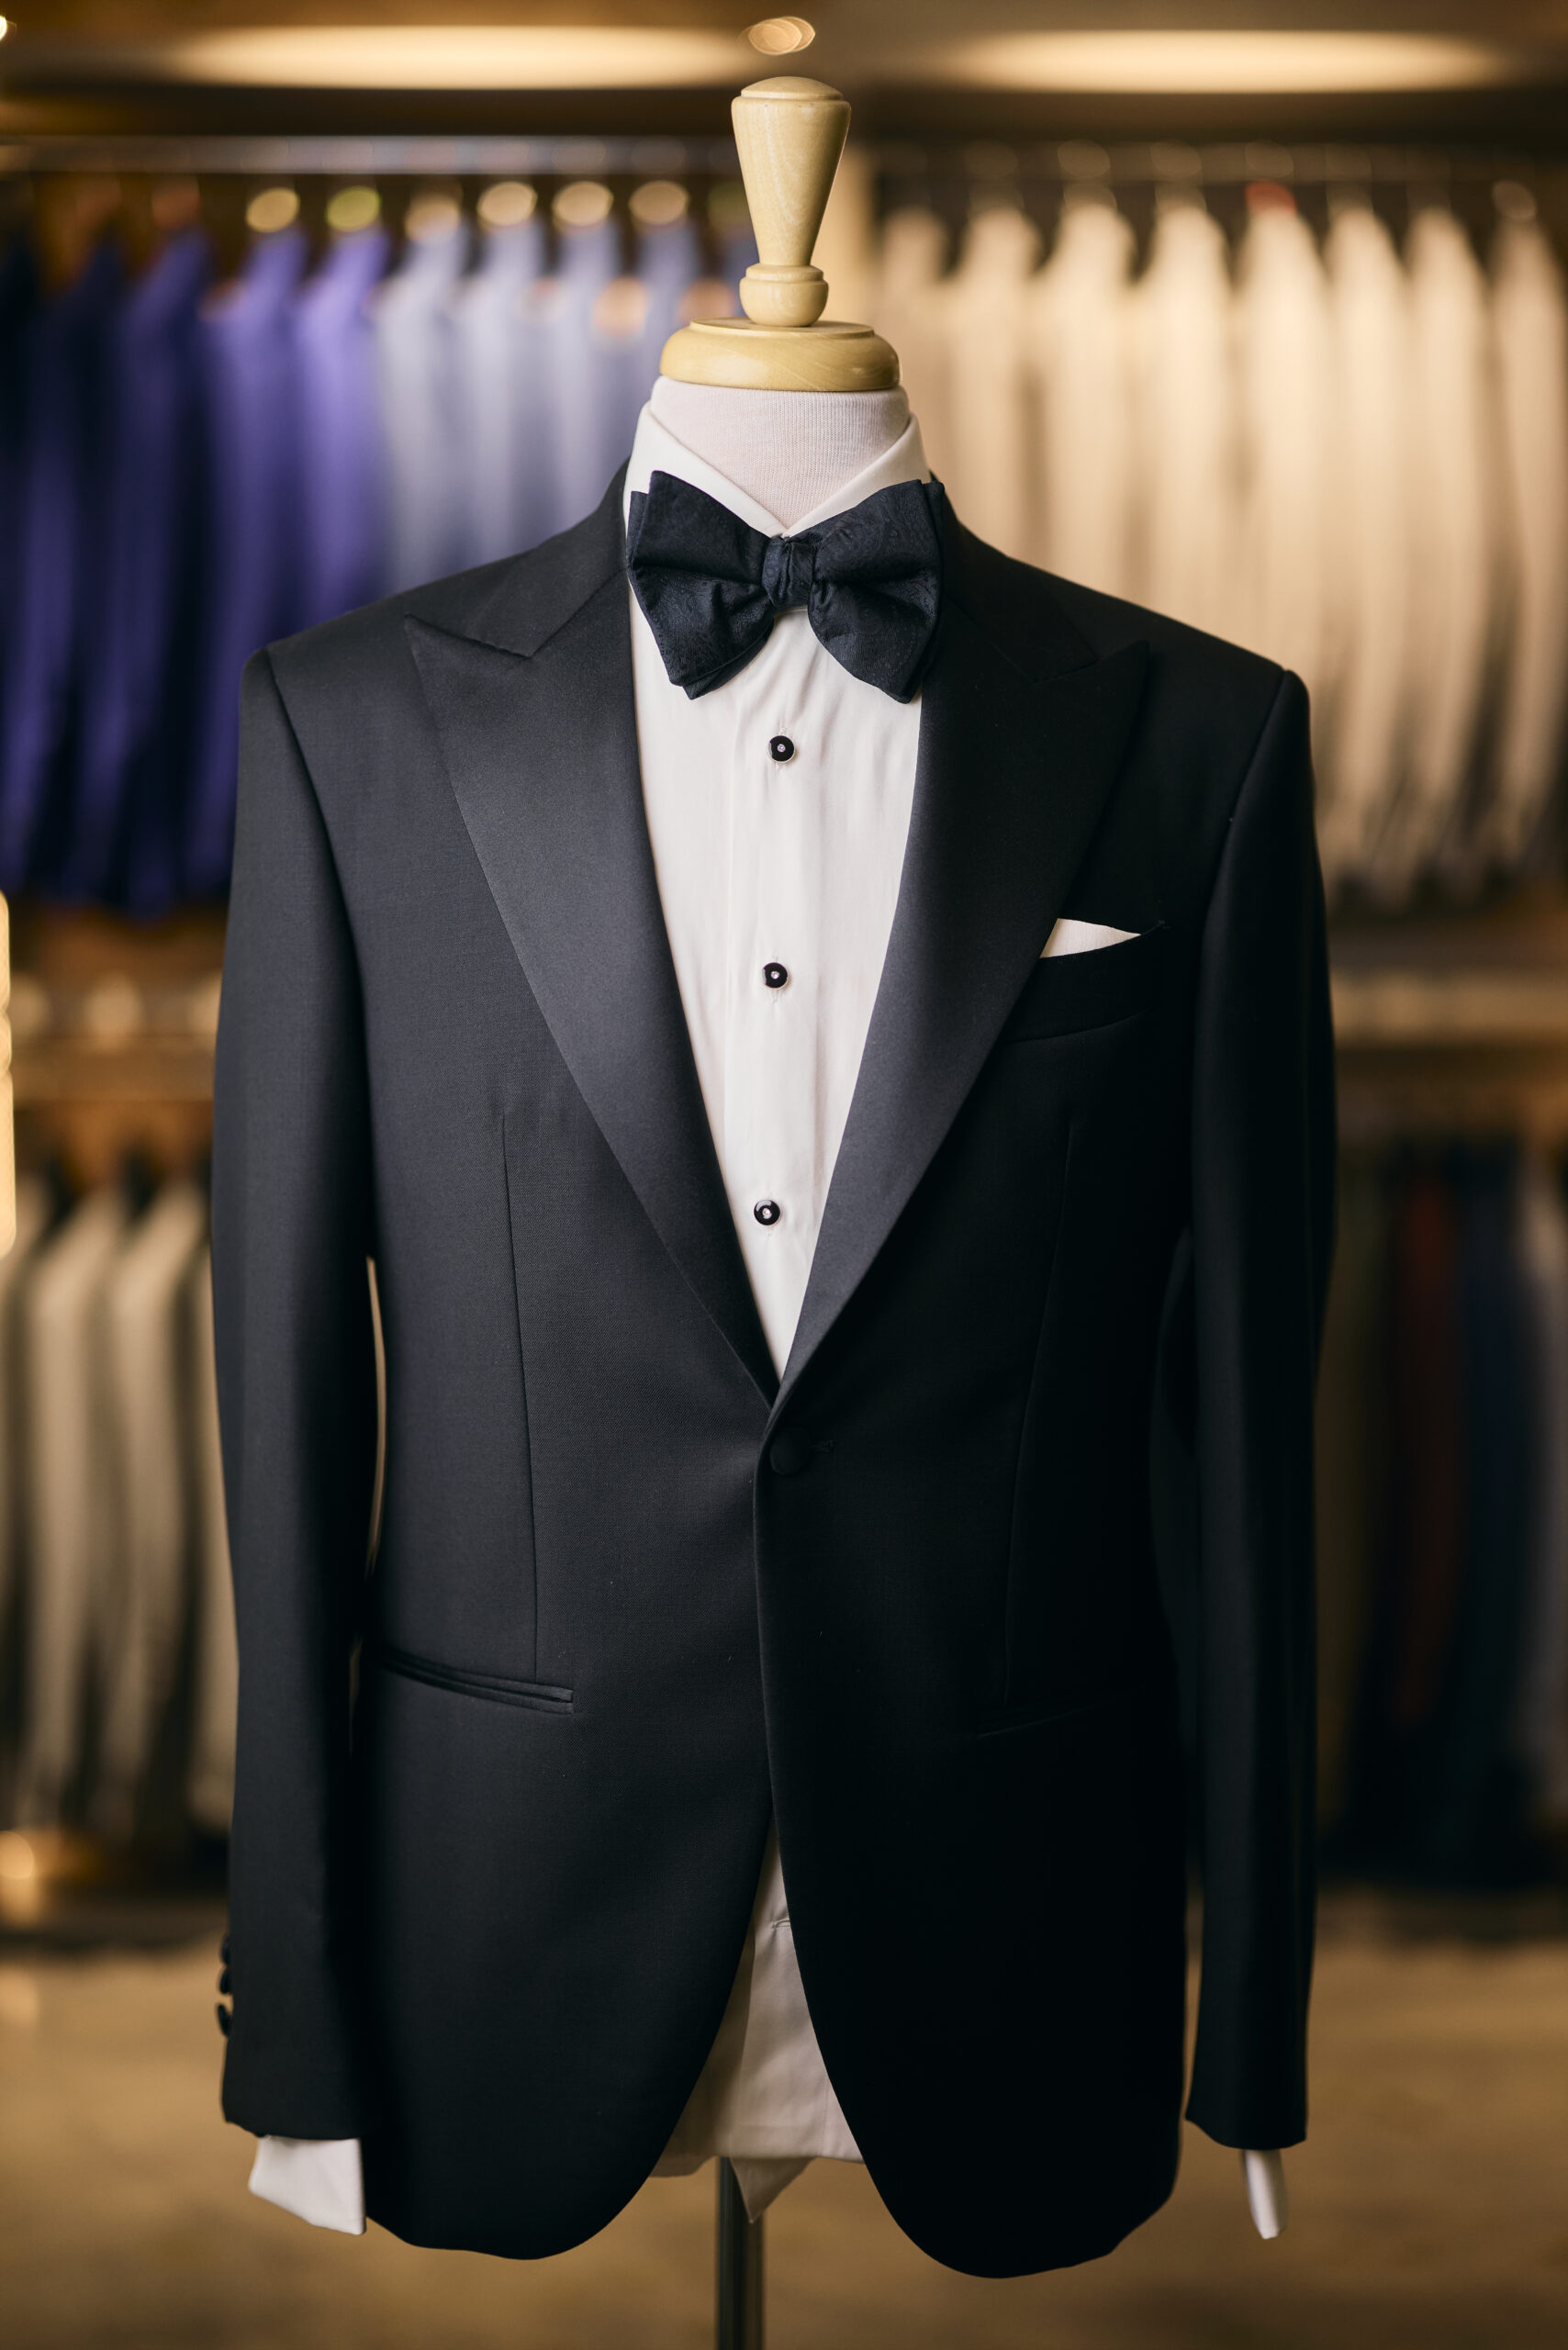 A Black Tuxedo - Made in Italy with a white dress shirt and black bow tie elegantly adorns a mannequin in a store, surrounded by other meticulously crafted suits hanging in the background.